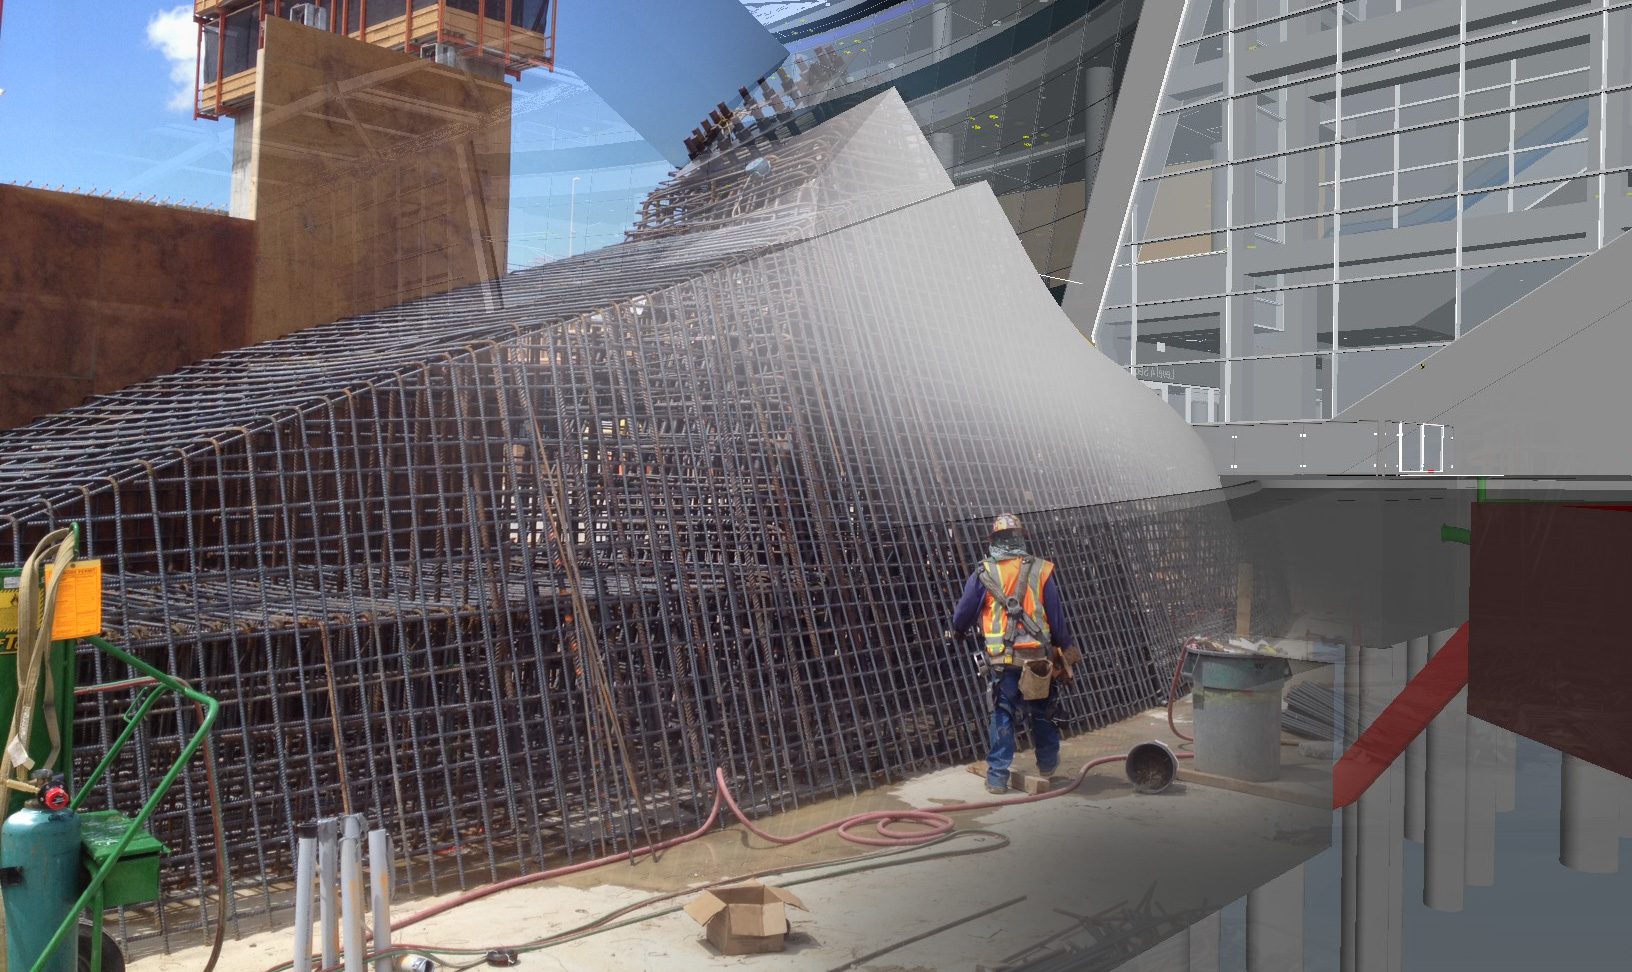 The scale of the base of the light-rail station canopy can be seen in this model/photo composite. The complexity of the rebar enforcement is something that craft workers can view on their iPads with models speeding the work. (Credit: William Lineberry, Design Technology Manager, HNTB)